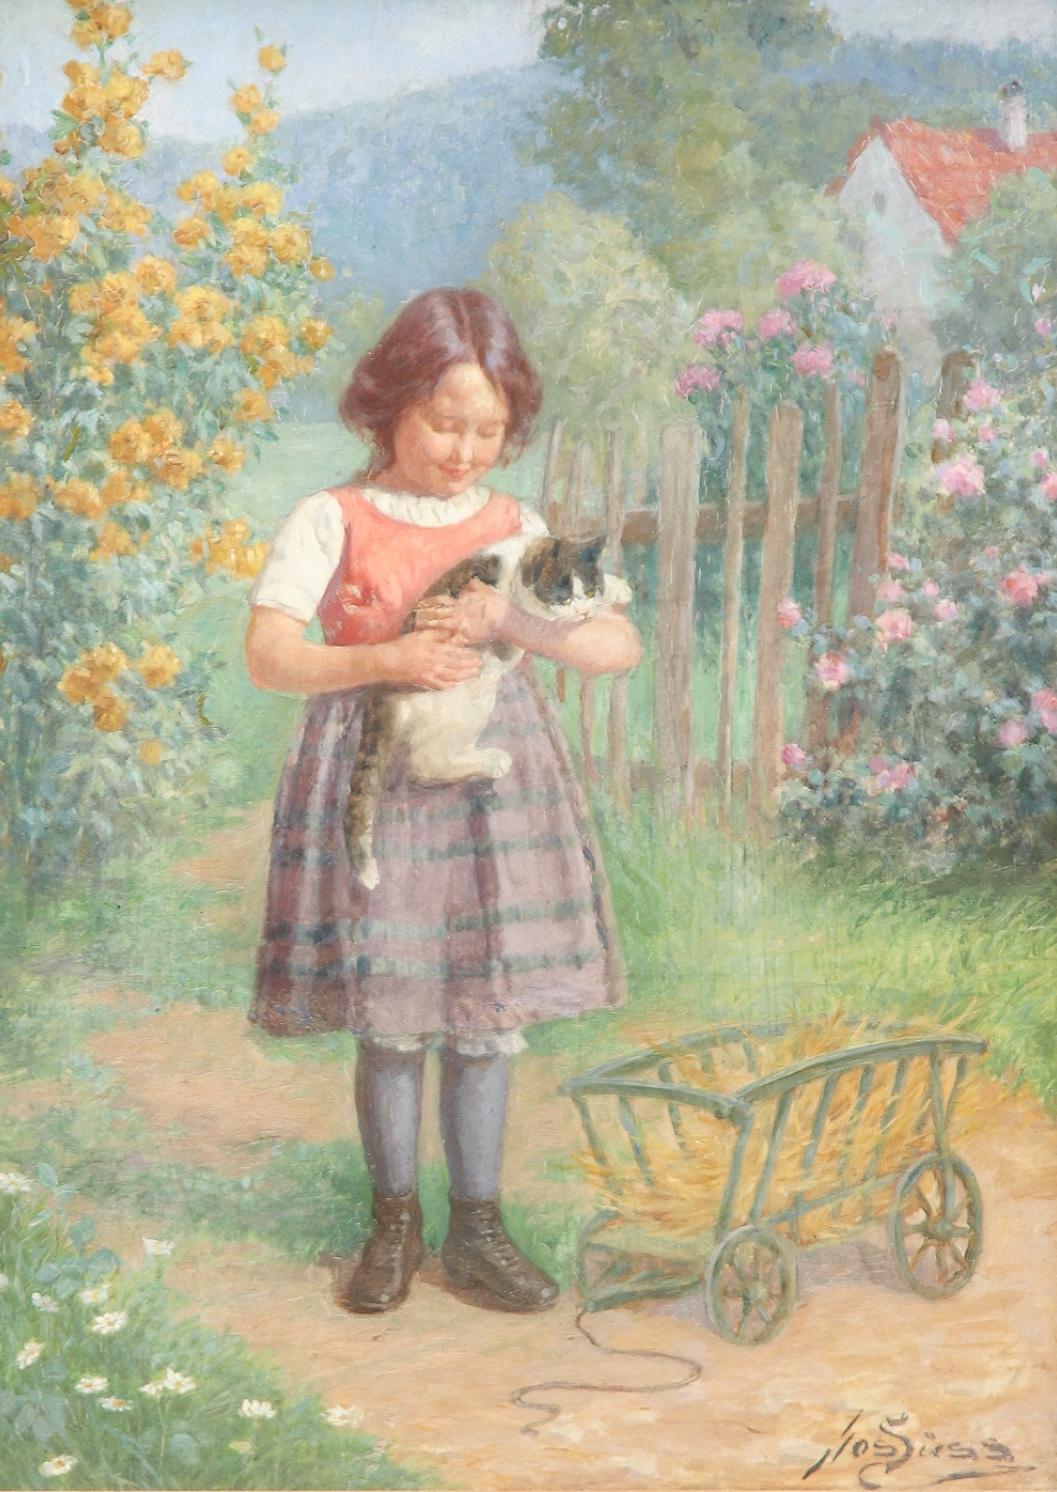 A sweet painting
Little girl with cat staying in landscape, oil on wood
Painter: Josef Wenzel Suss 1857-1937
size unframed: H 35, W 25
size framed: H 46, W 36, D 6. all in cm.